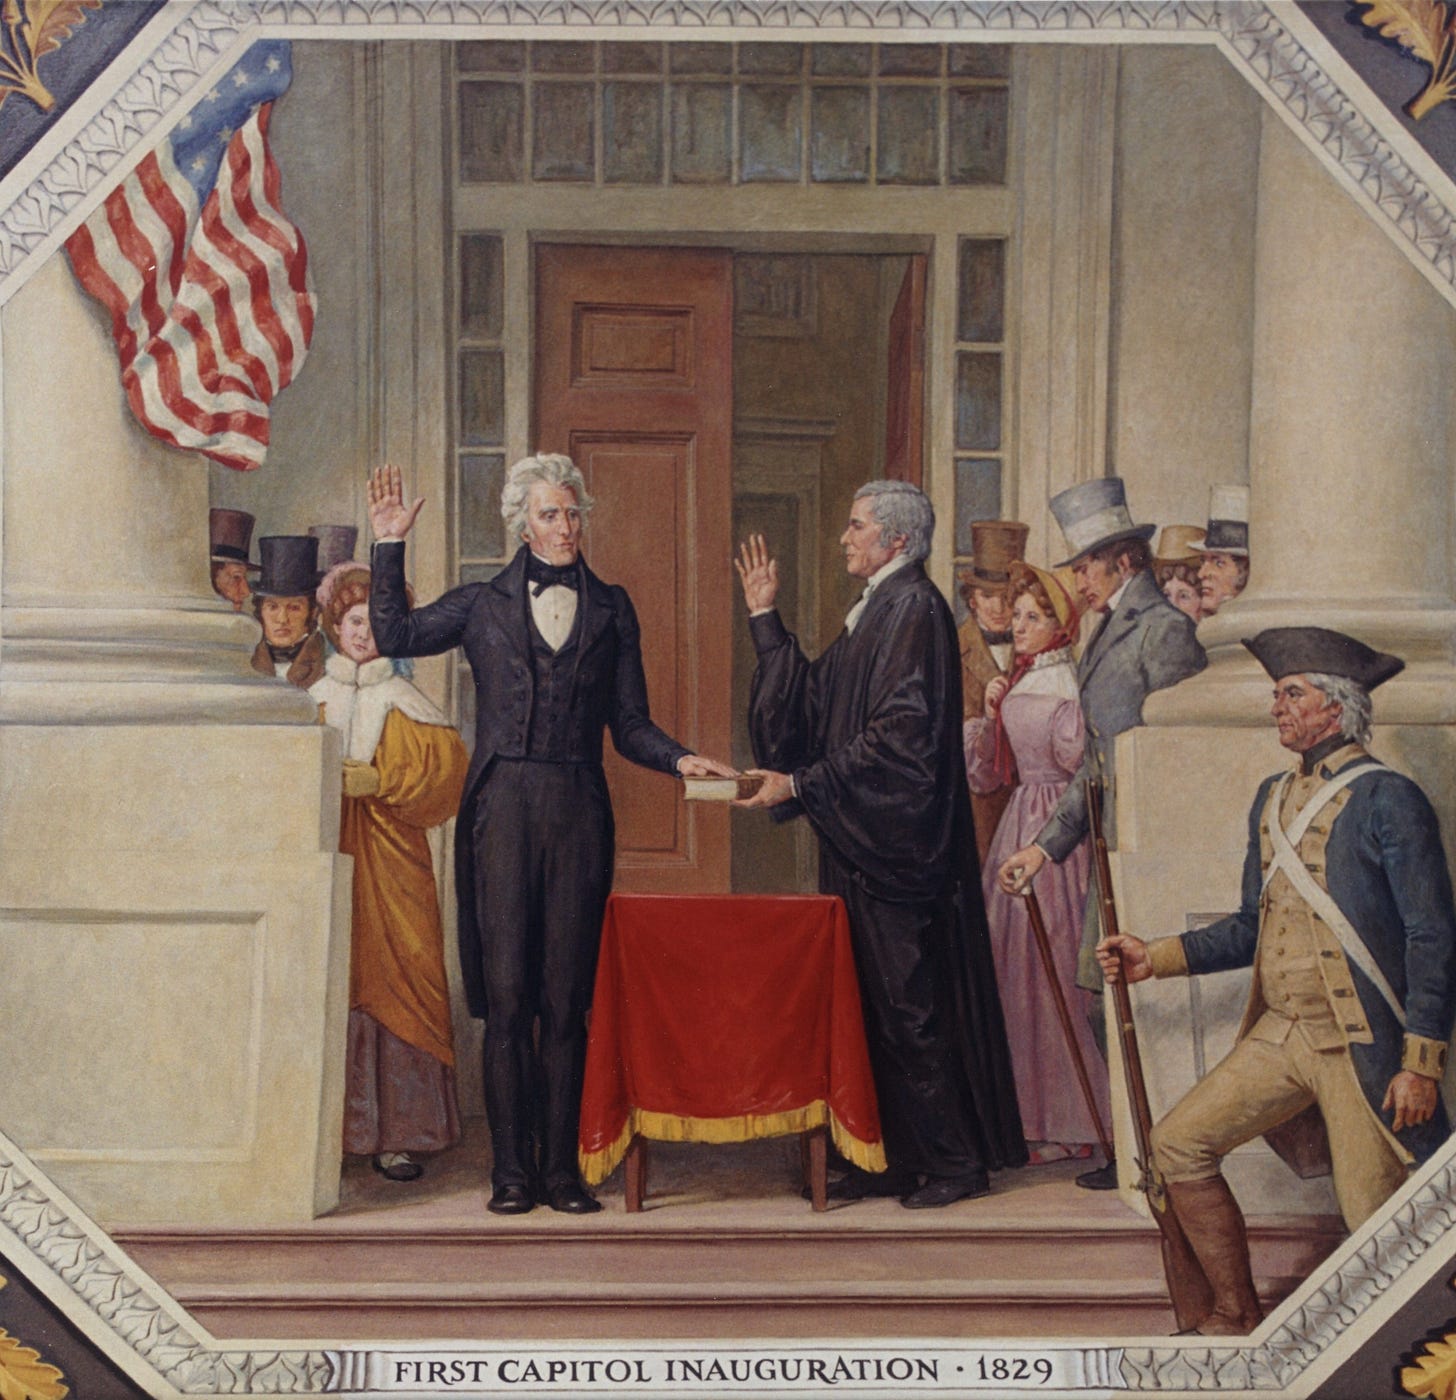 U.S. Capitol mural by Allyn Cox: Chief Justice John Marshall administering the oath of office to Andrew Jackson on the east portico of the U.S. Capitol, March 4, 1829